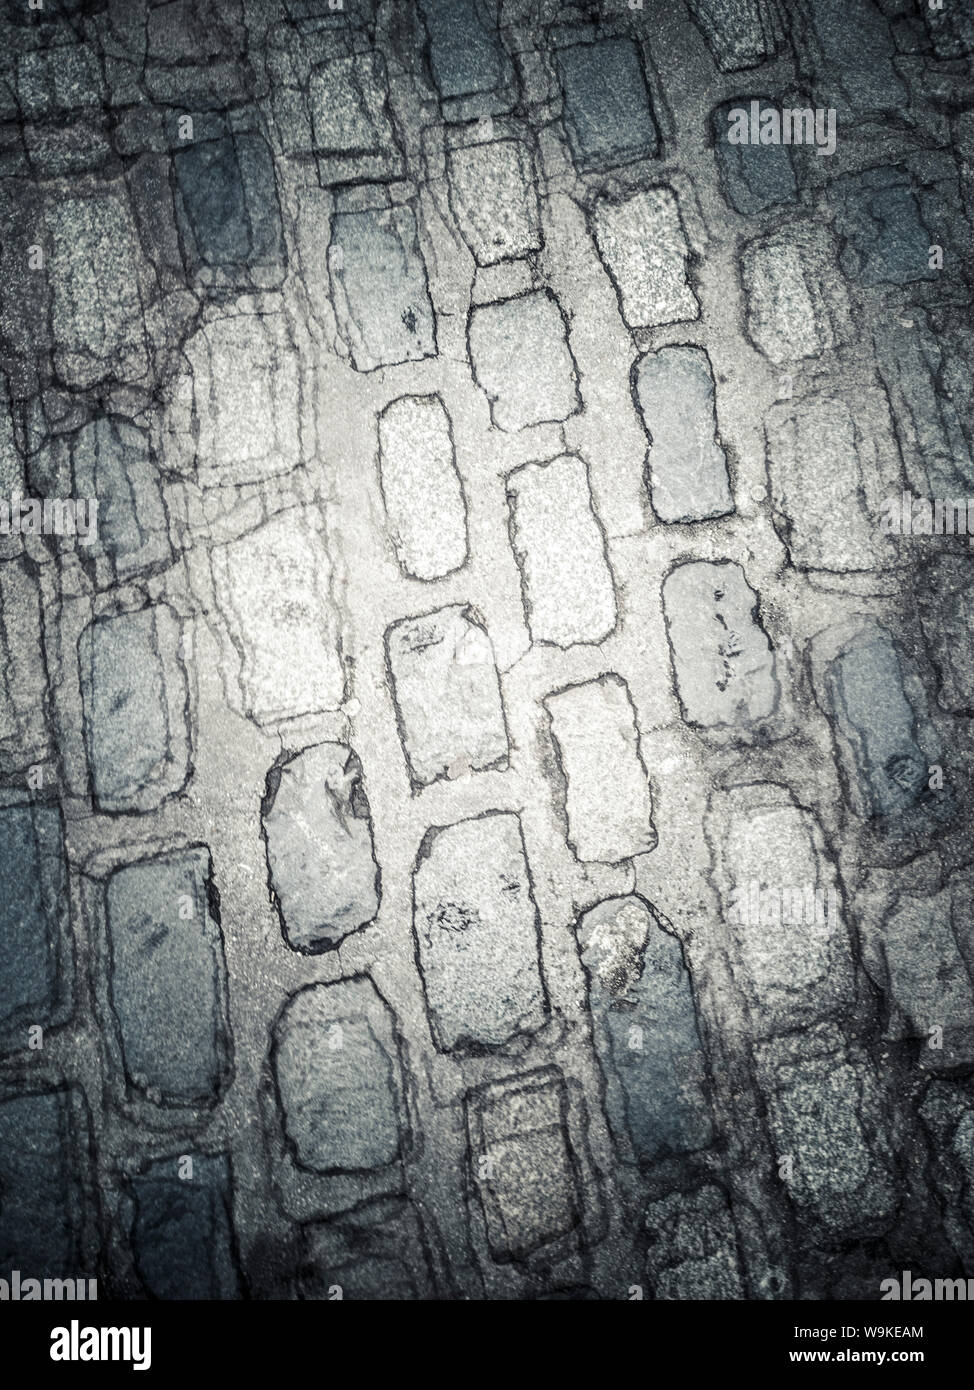 double vision full frame shot of granite cobbled street from above (layered image) Stock Photo